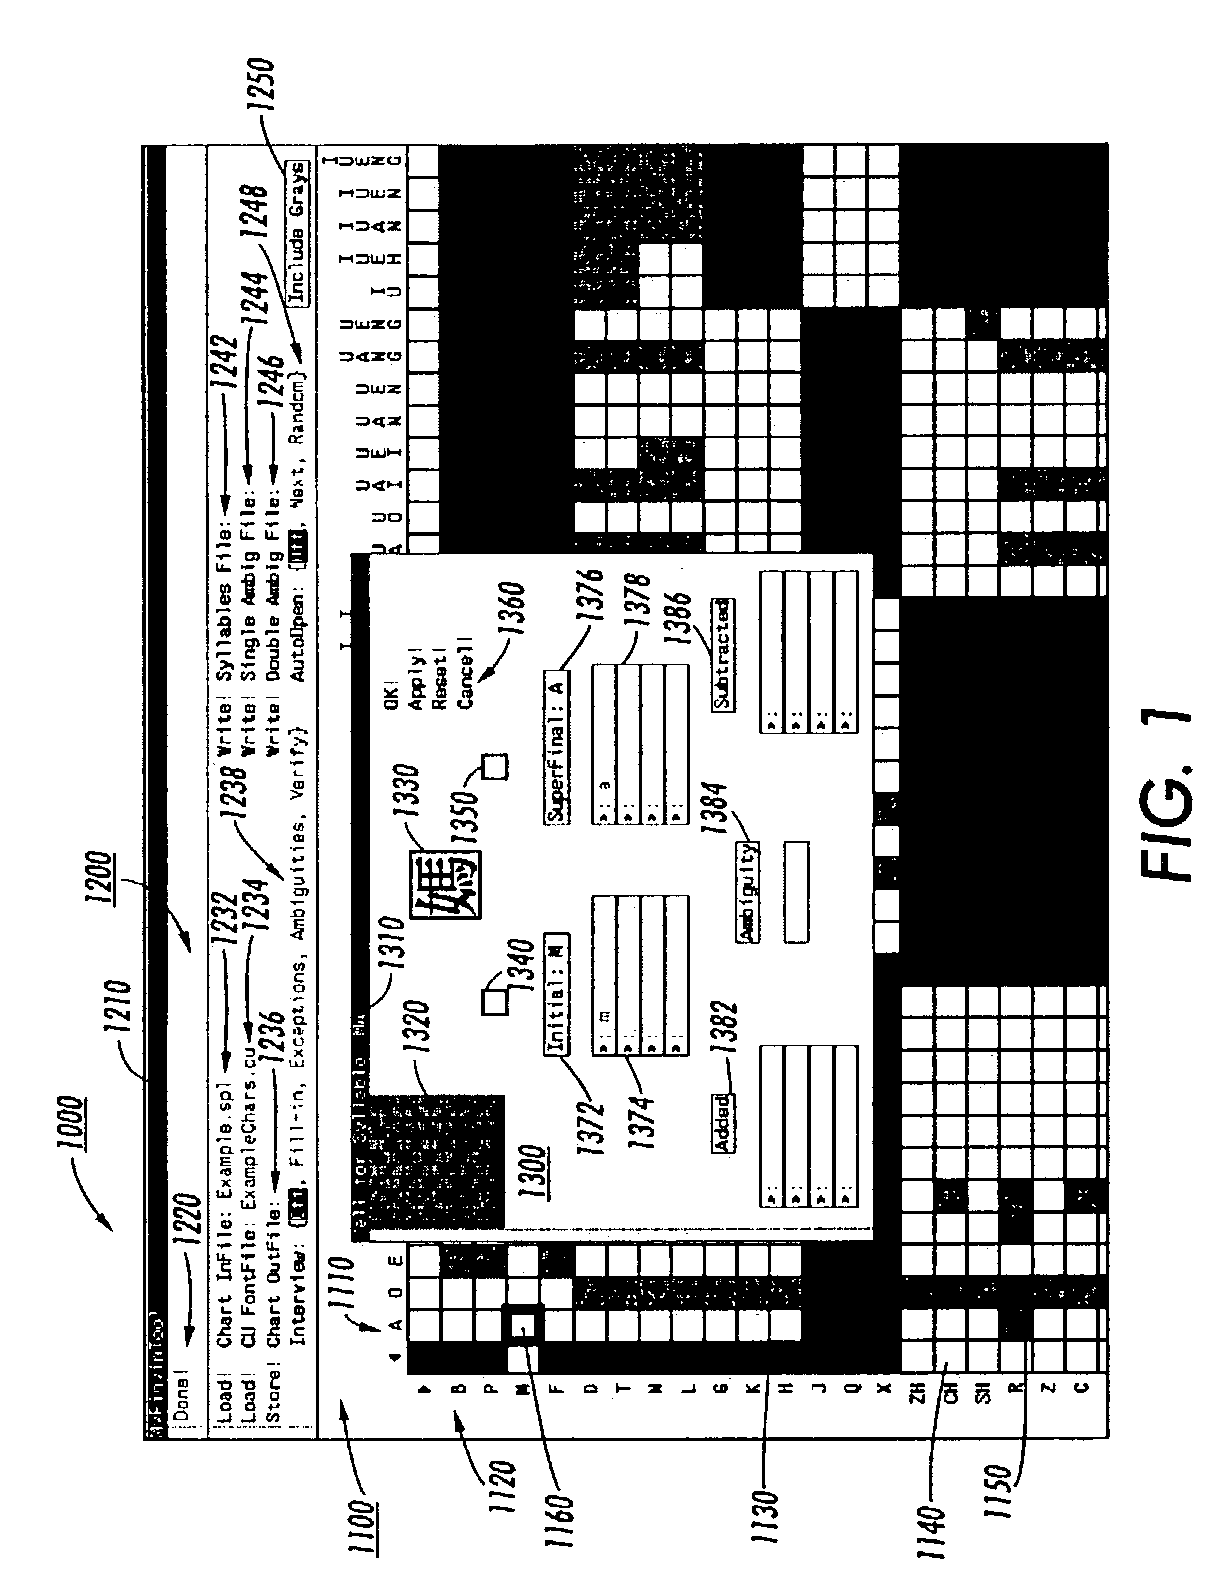 User-tailorable romanized Chinese text input systems and methods